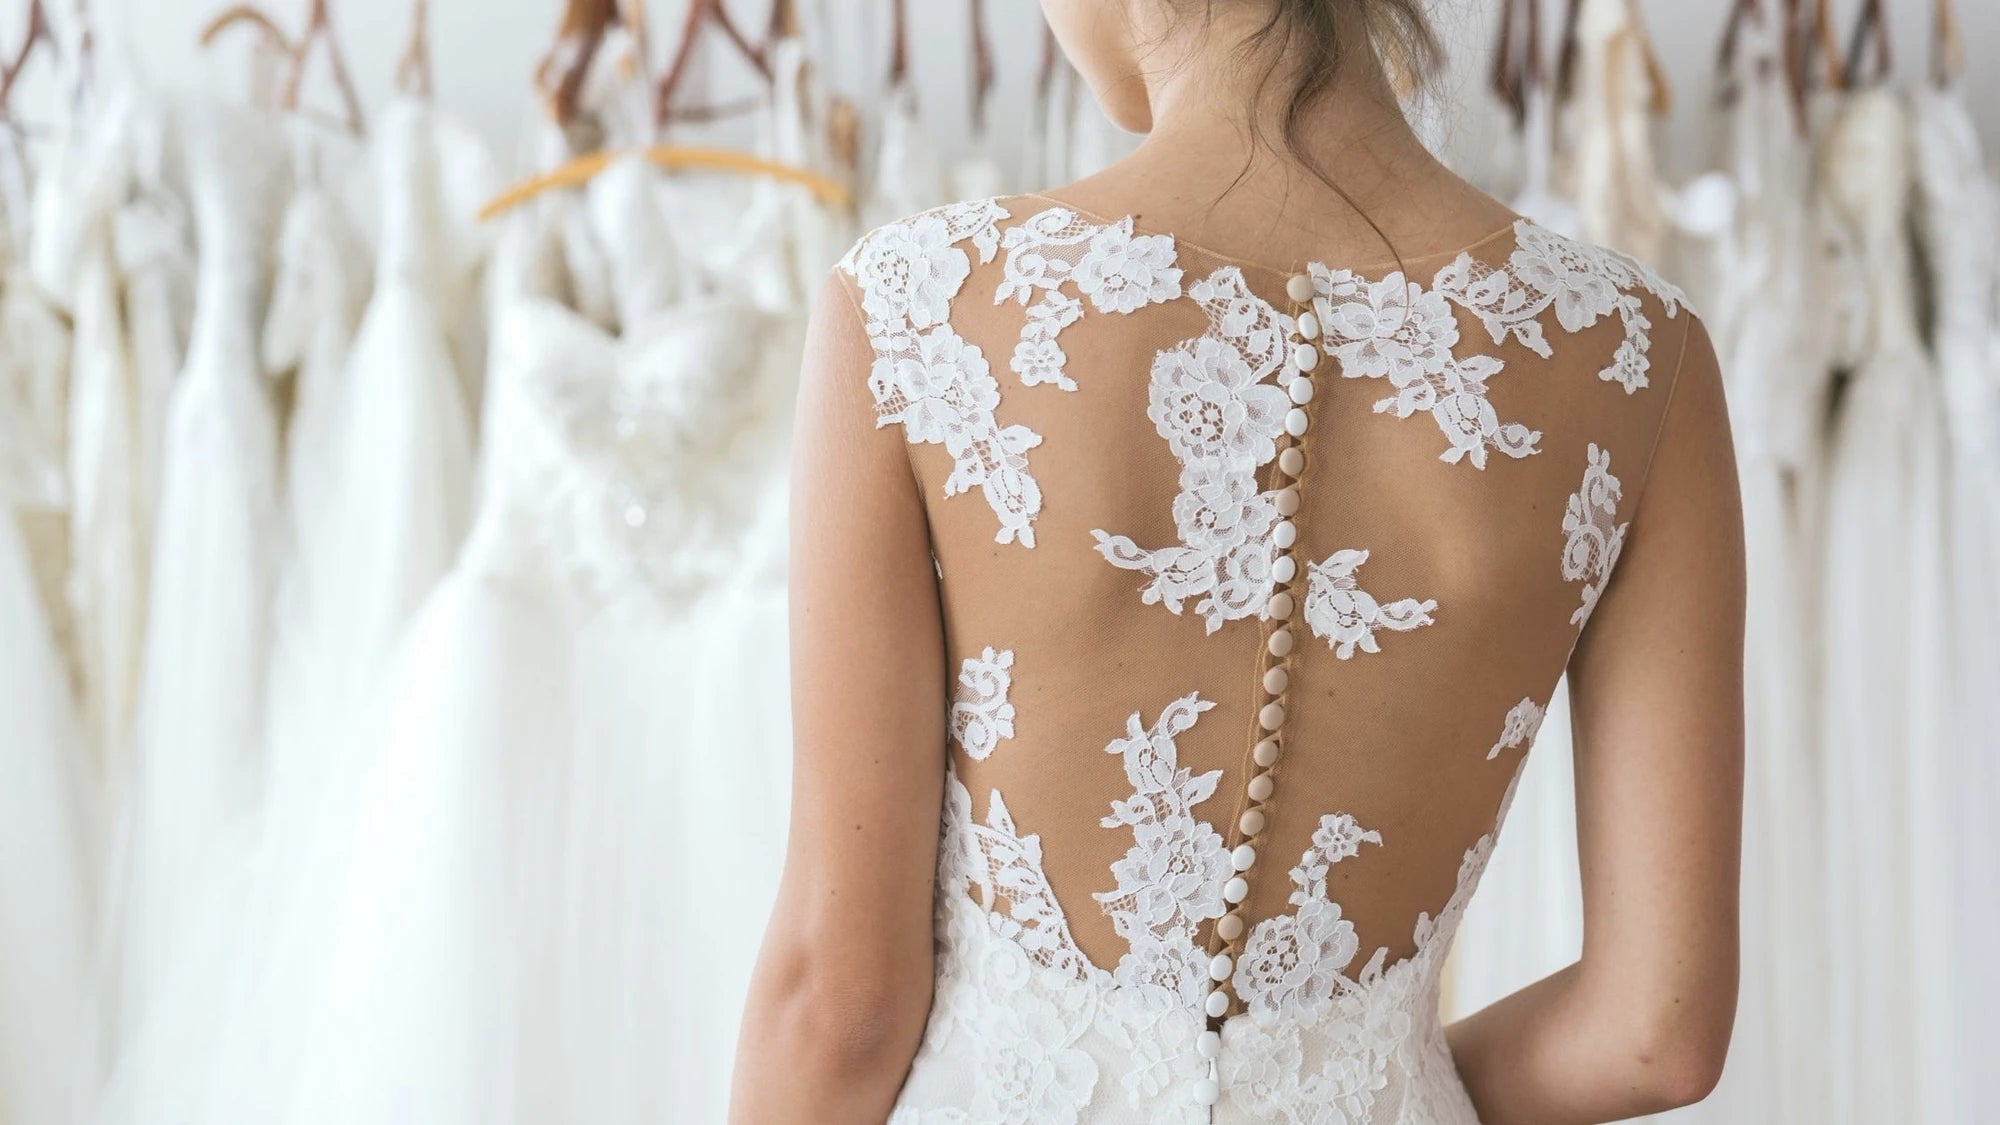 8 Tips For Wearing a Backless Wedding Dress